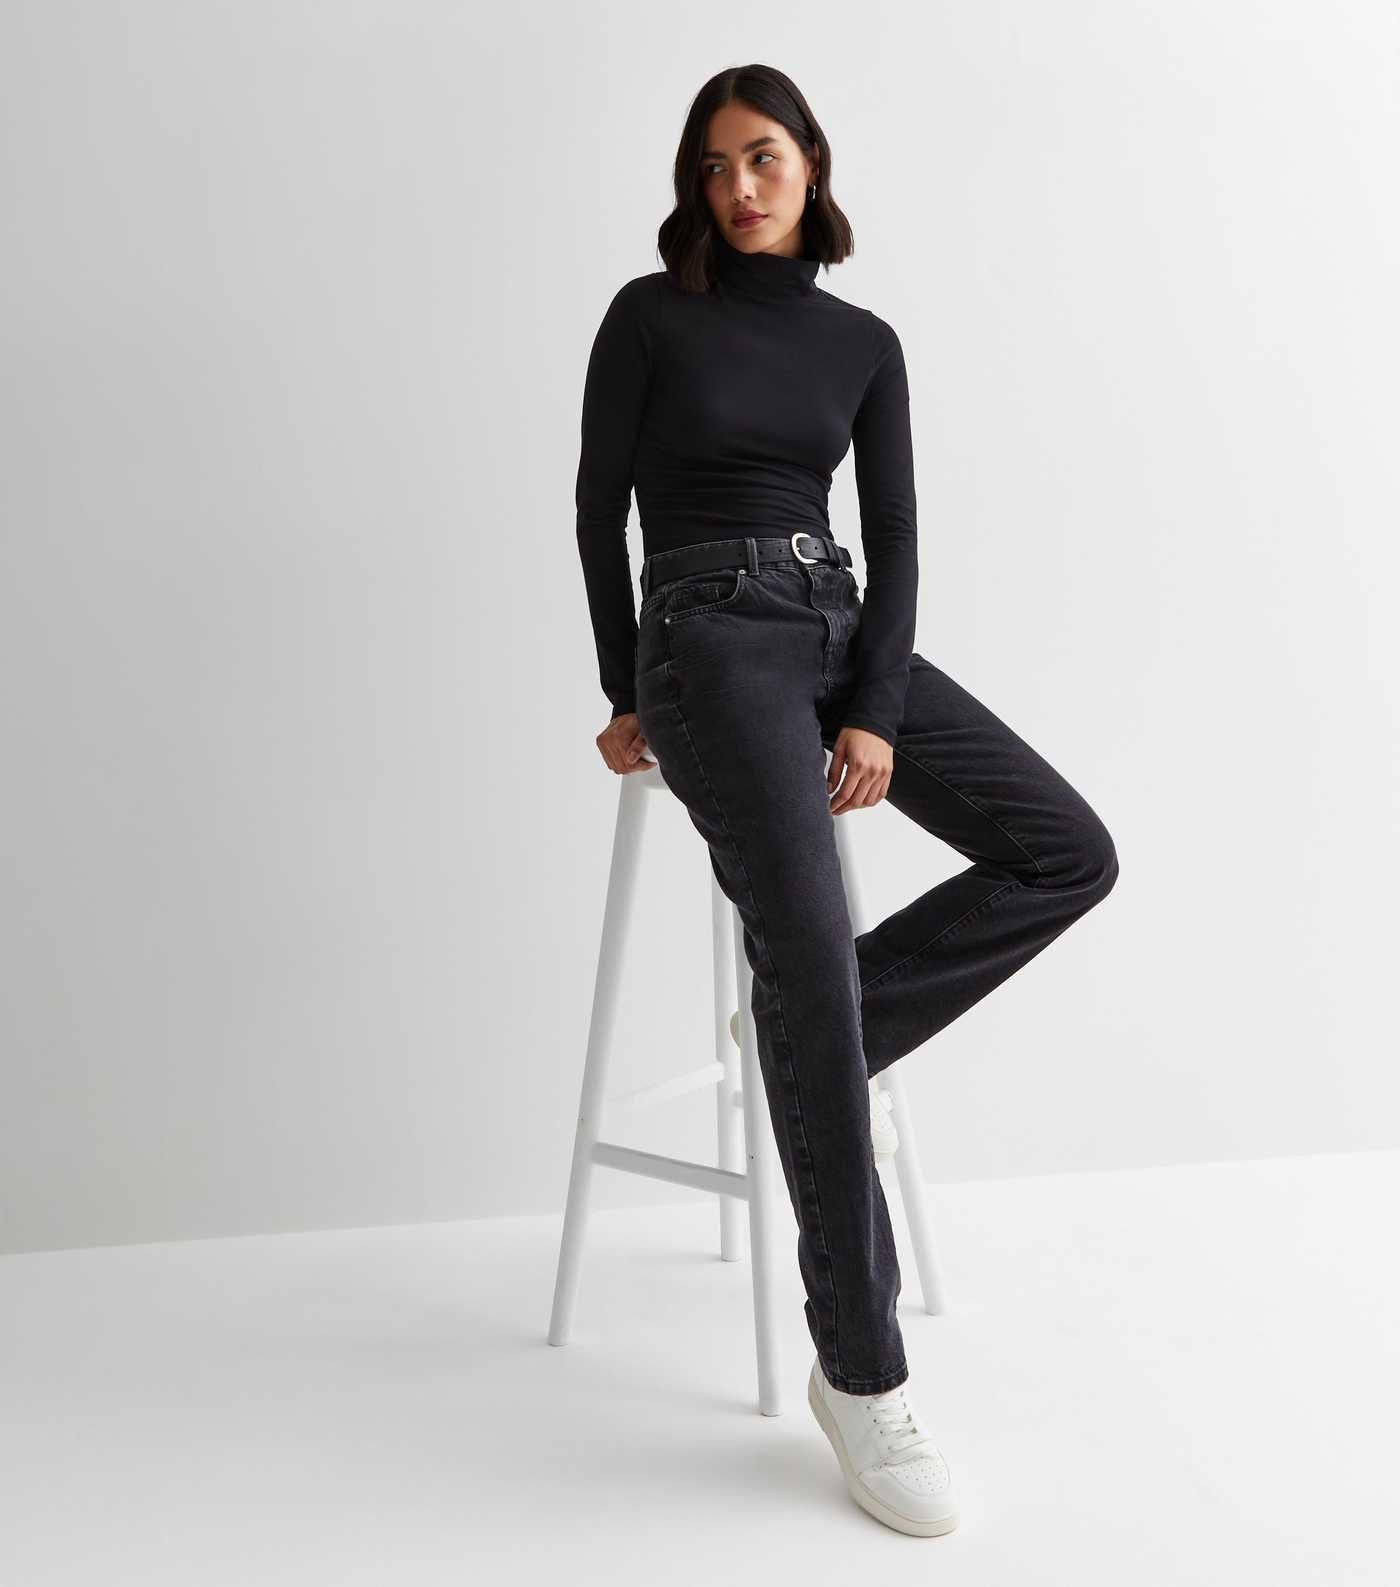 Black High Neck Long Sleeve Top
						
						Add to Saved Items
						Remove from Saved Items | New Look (UK)